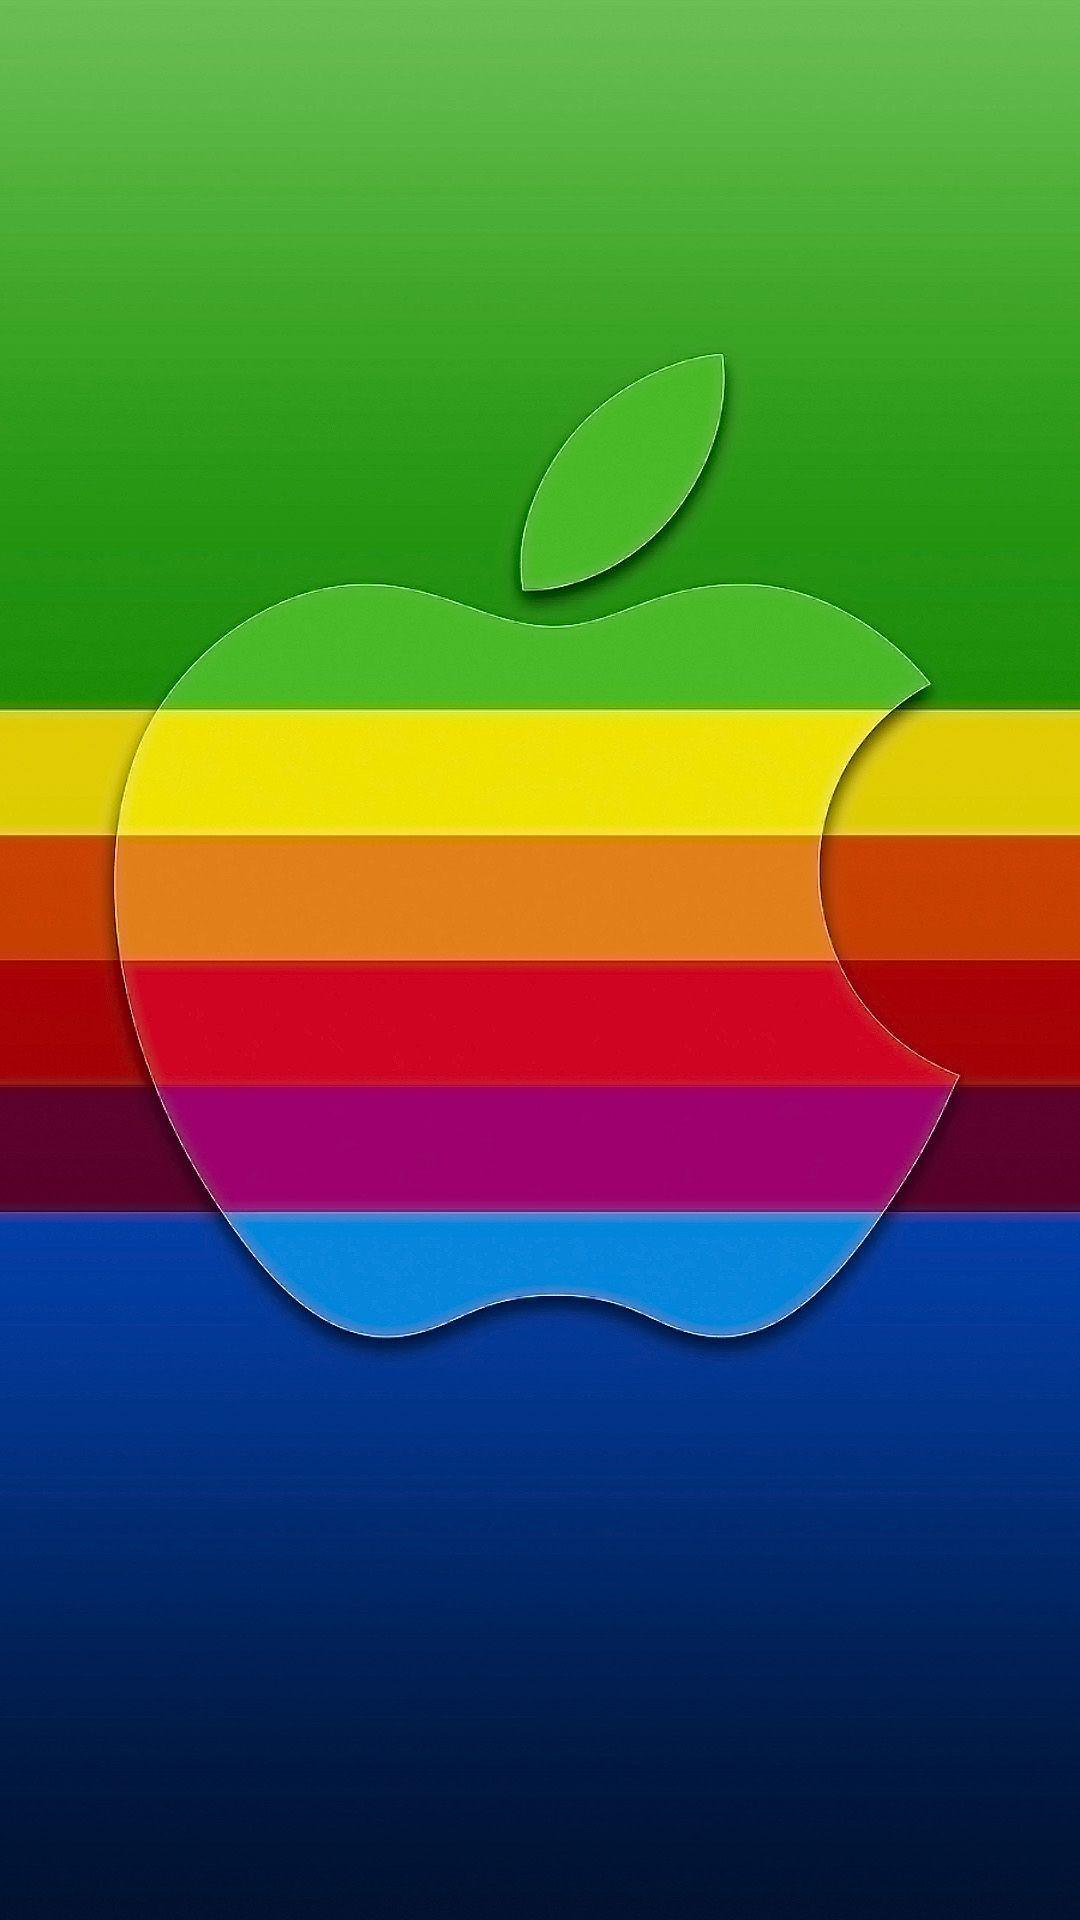 red apple logo iphone wallpaper Bing image Apples in Pink and. HD